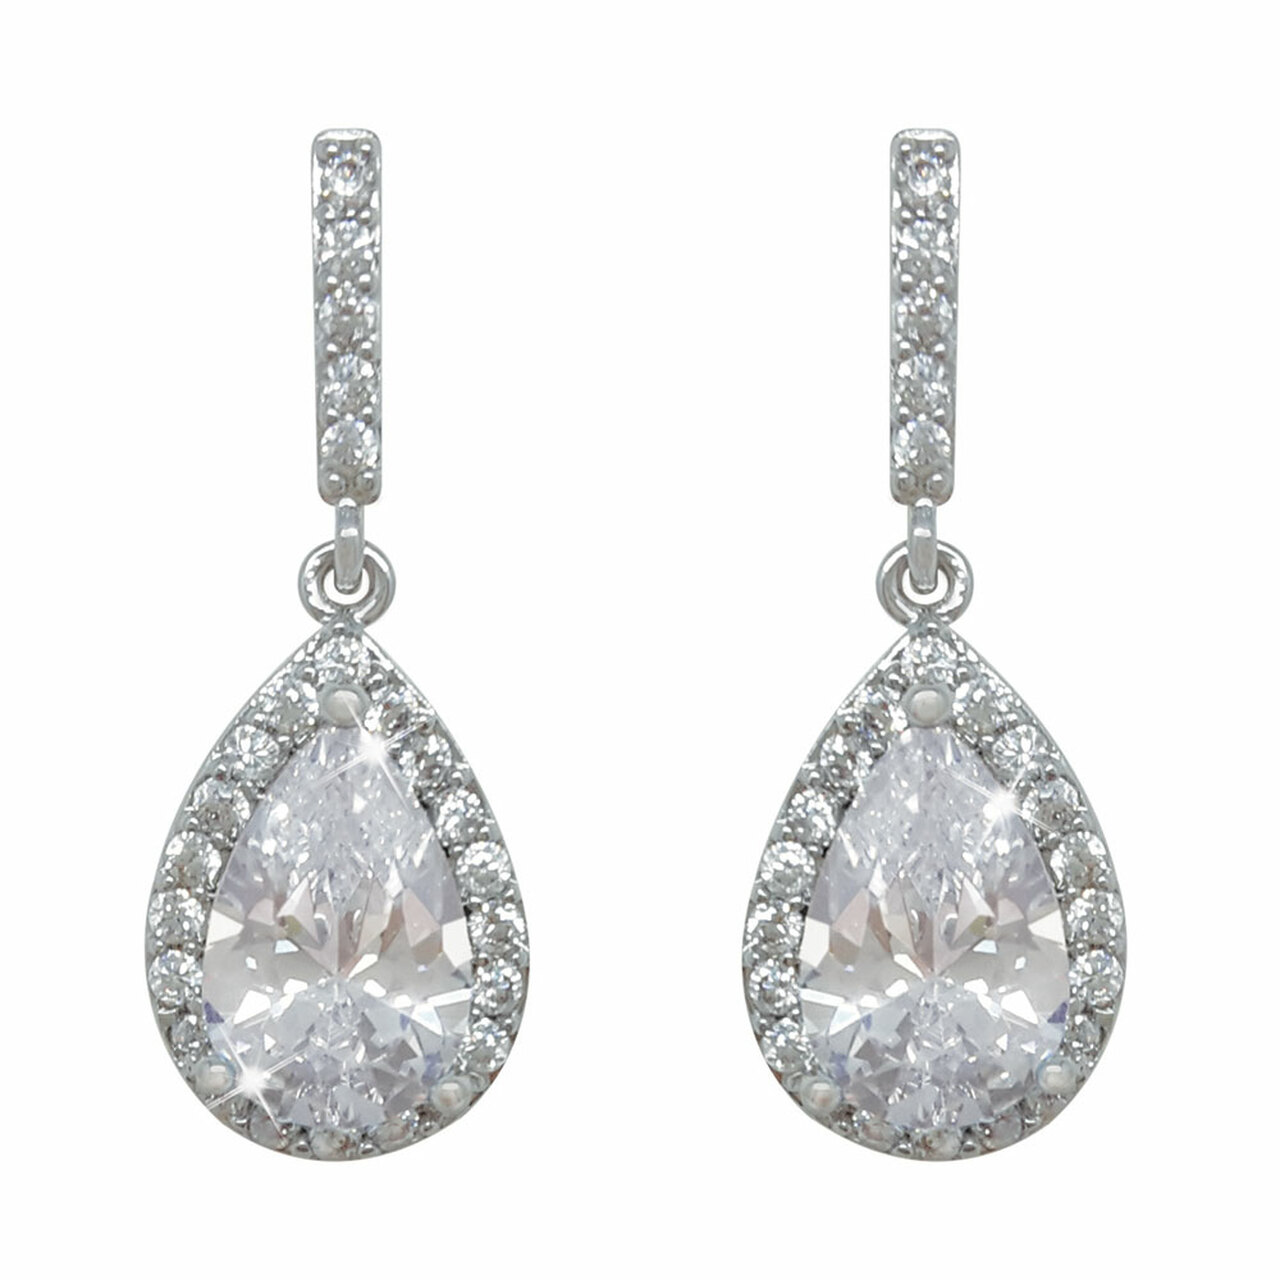 14.TIPPERARY CRYSTAL Silver Pear Shaped Earrings €25, 